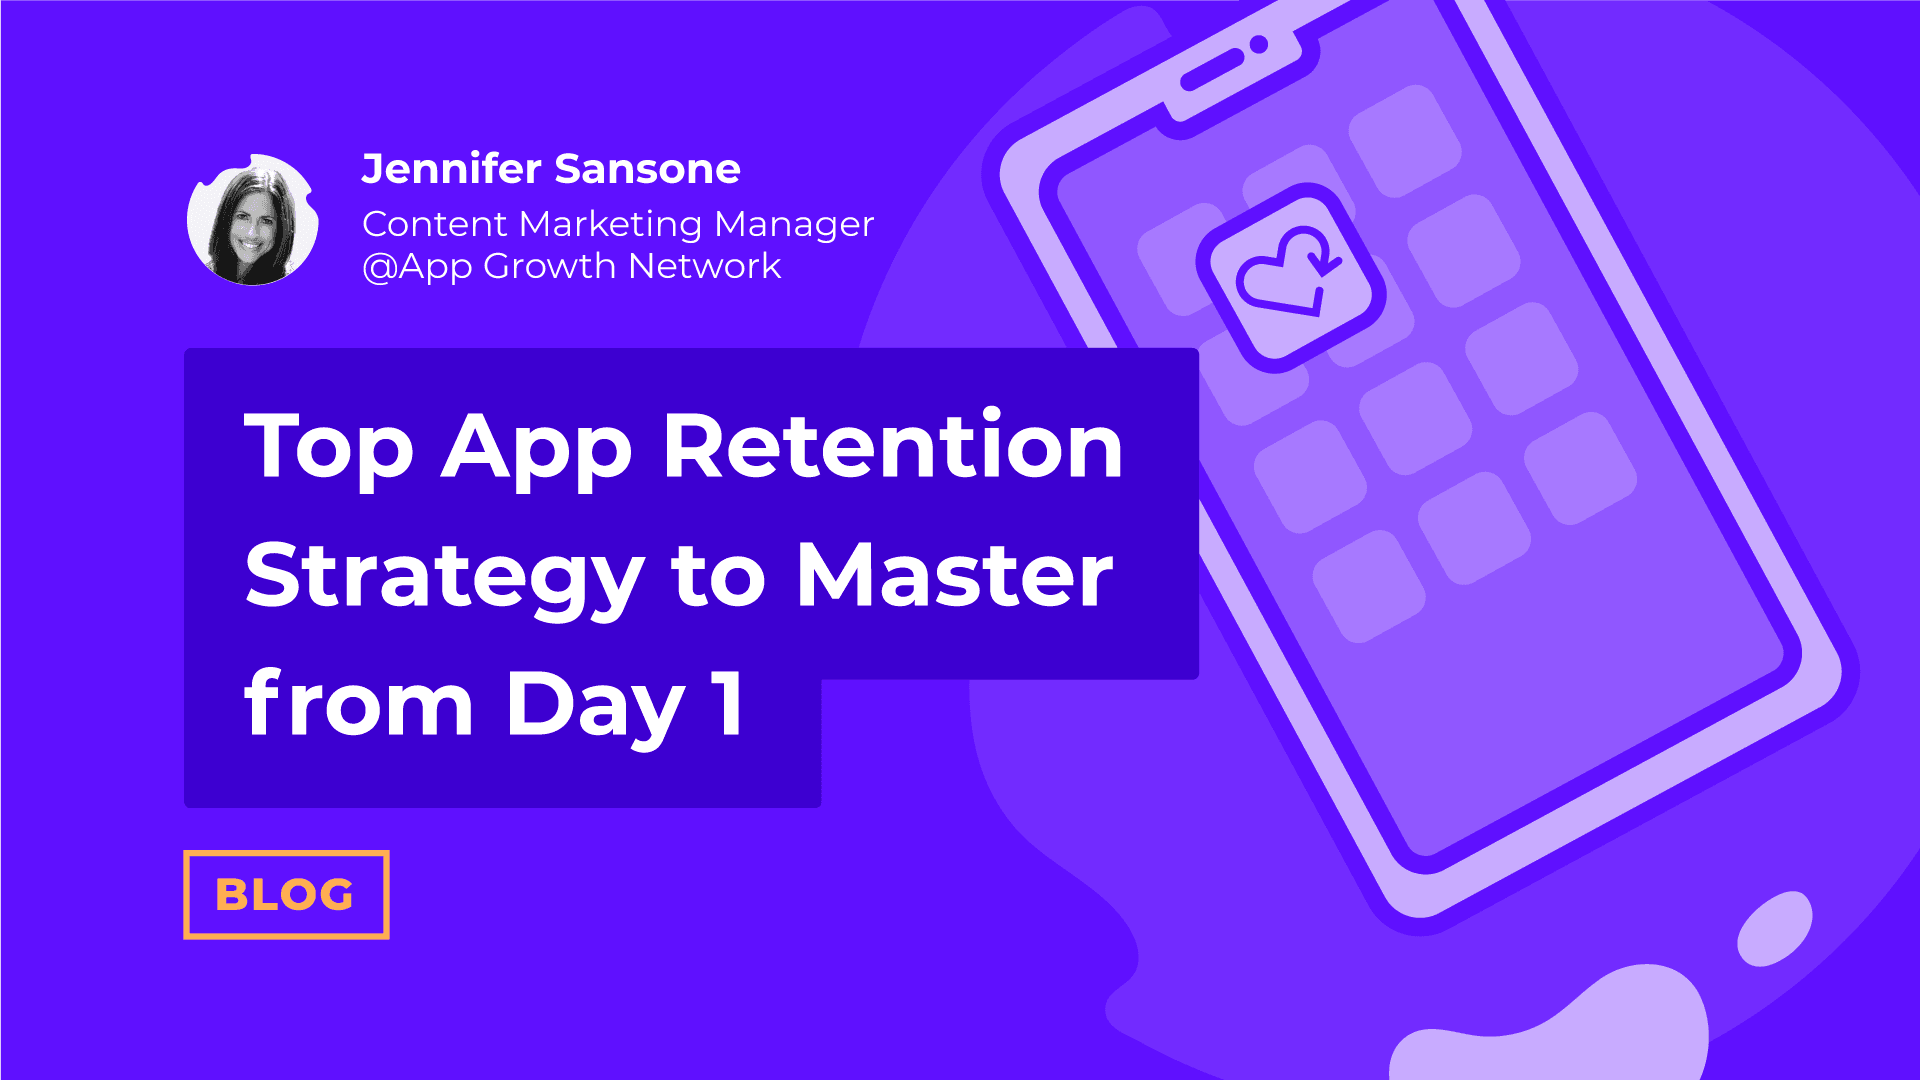 Top App Retention Strategy to Master from Day 1